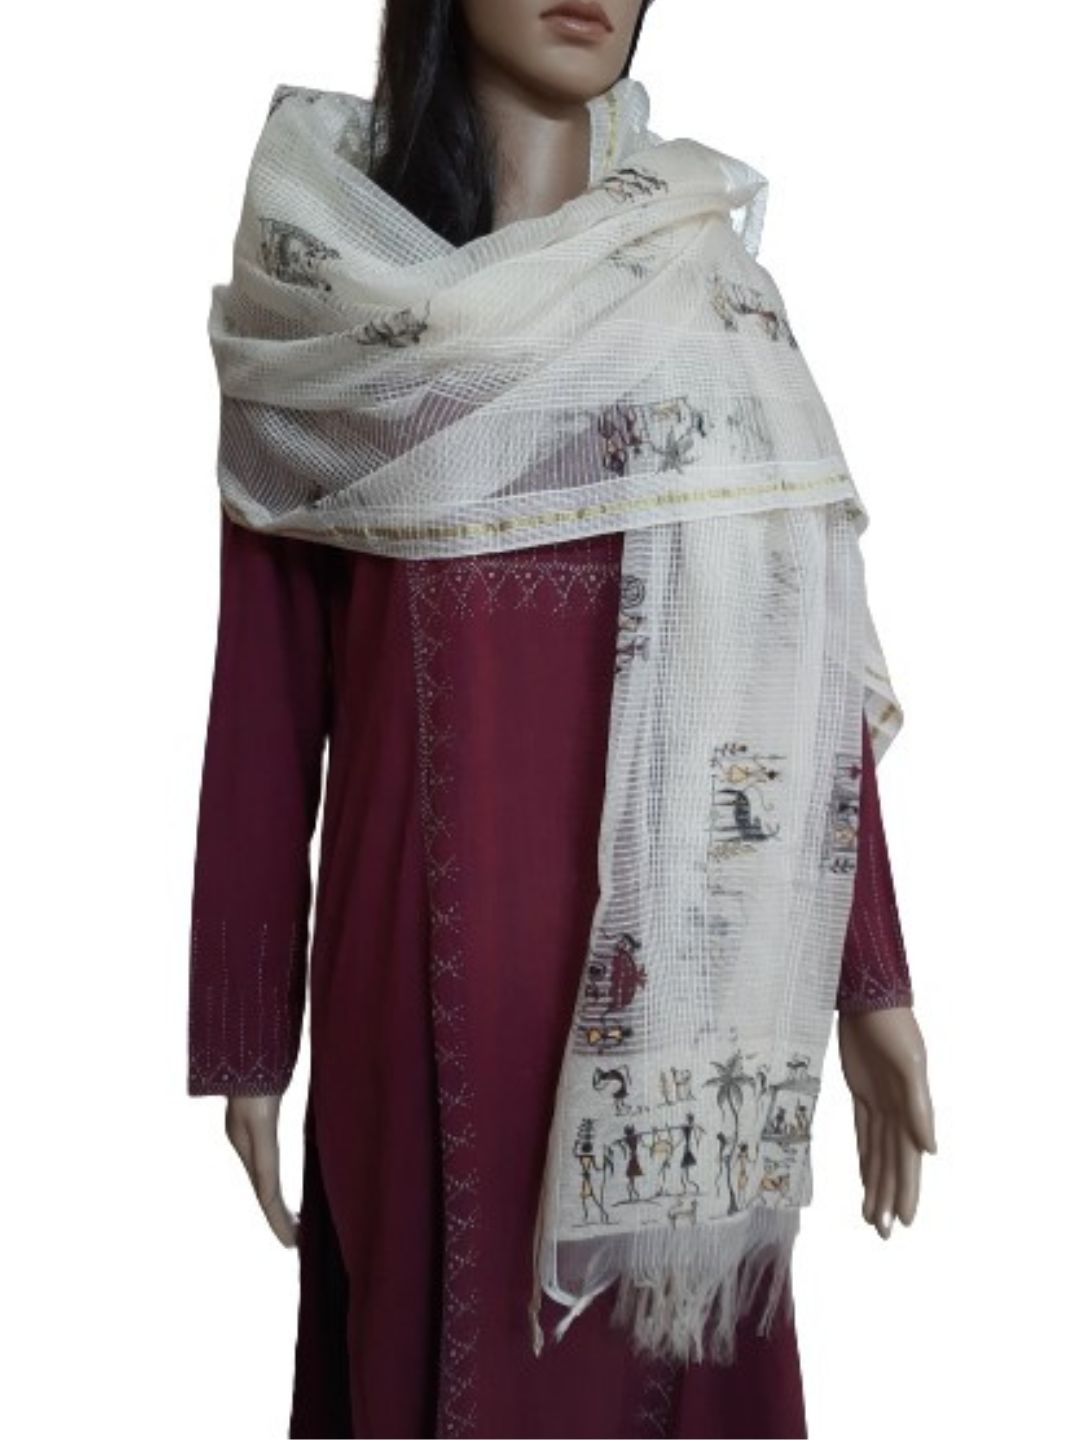 Offwhite cotton net Dupatta with hand painted Tribal Motifs